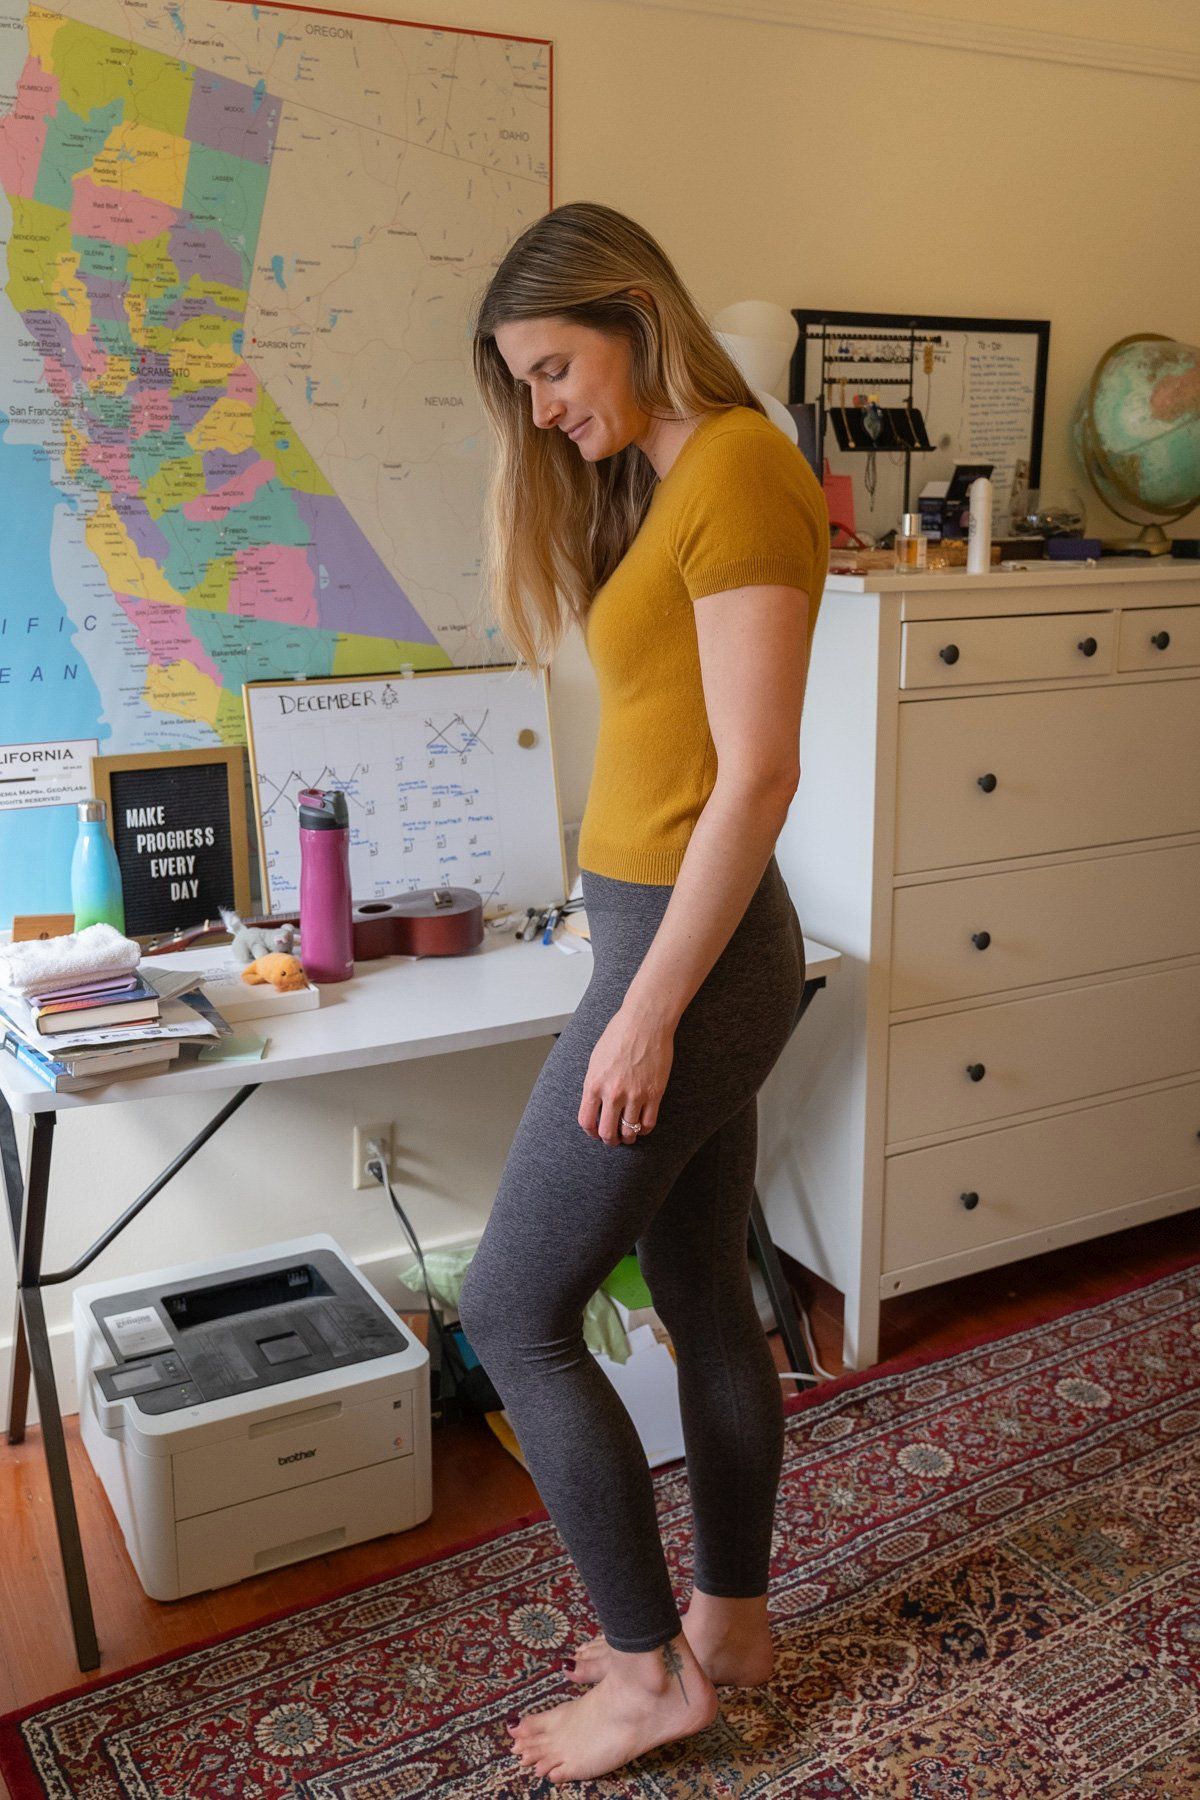 A young woman wearing grey Ultra-Soft High-Rise Leggings and a yellow shirt stands to the side, looking down in an interior setting with a map of California on the wall behind her.